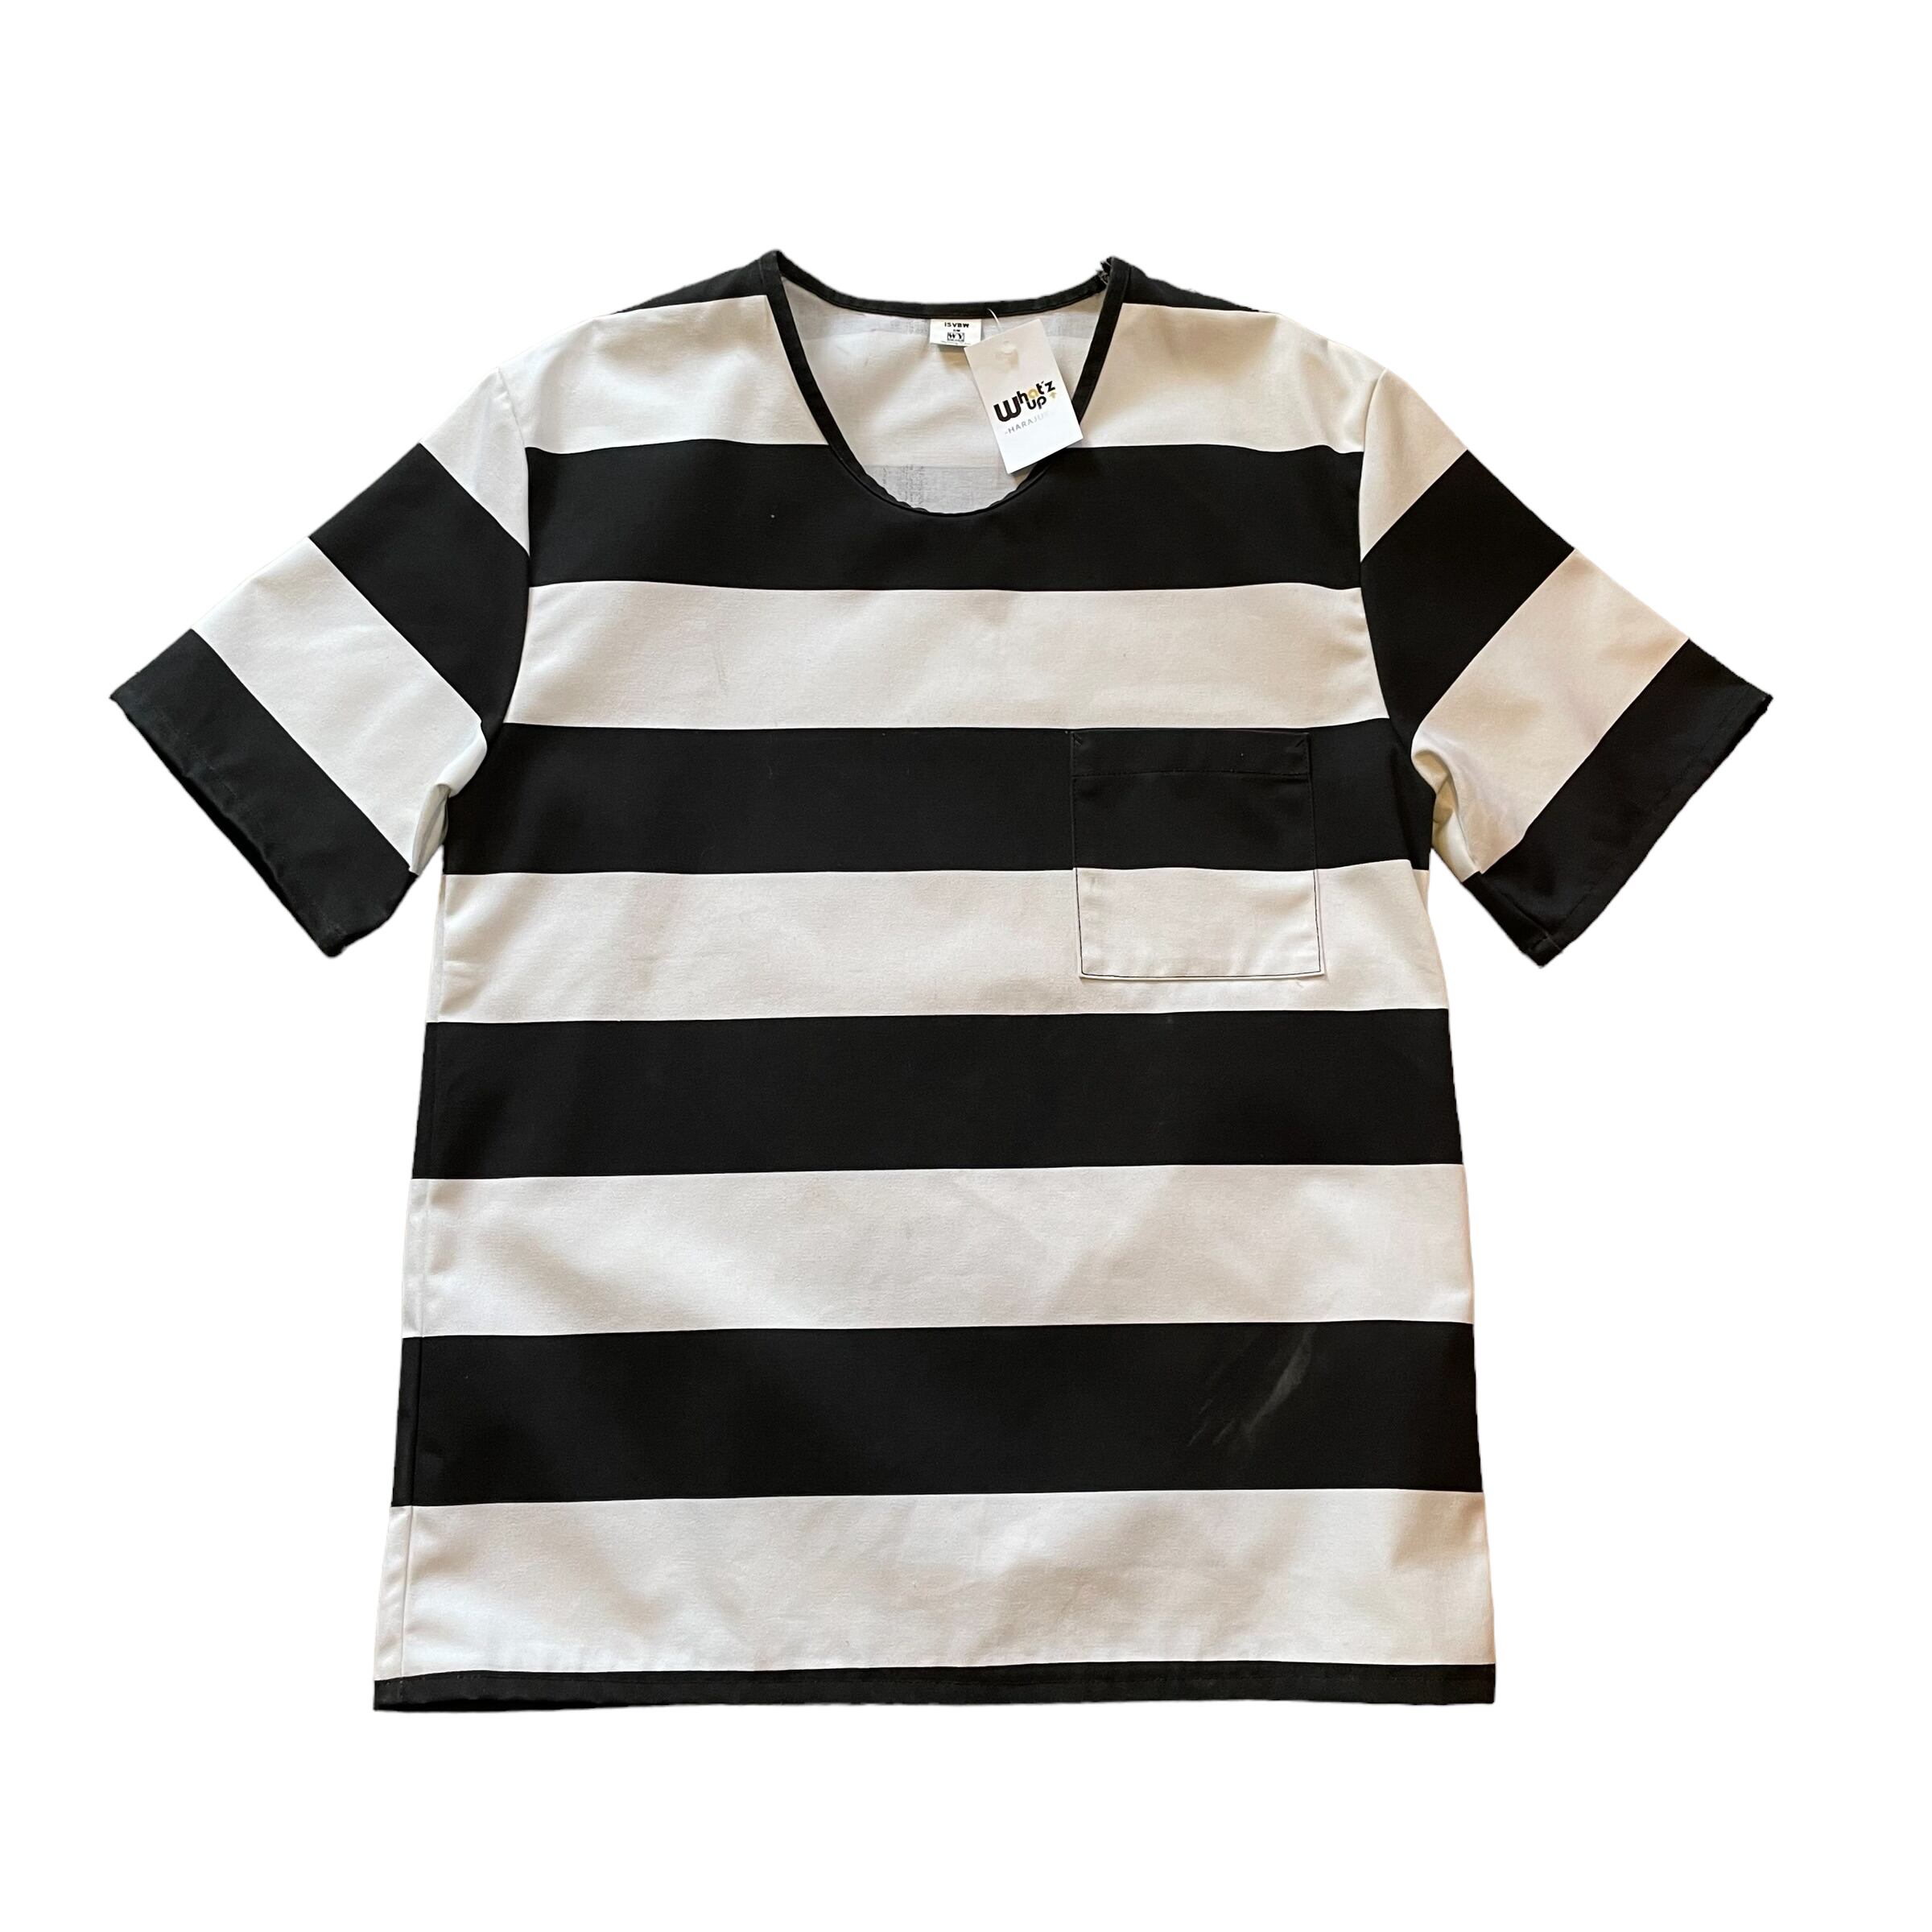 00s〜 WYO FRONTIER PRISON shirt | What’z up powered by BASE